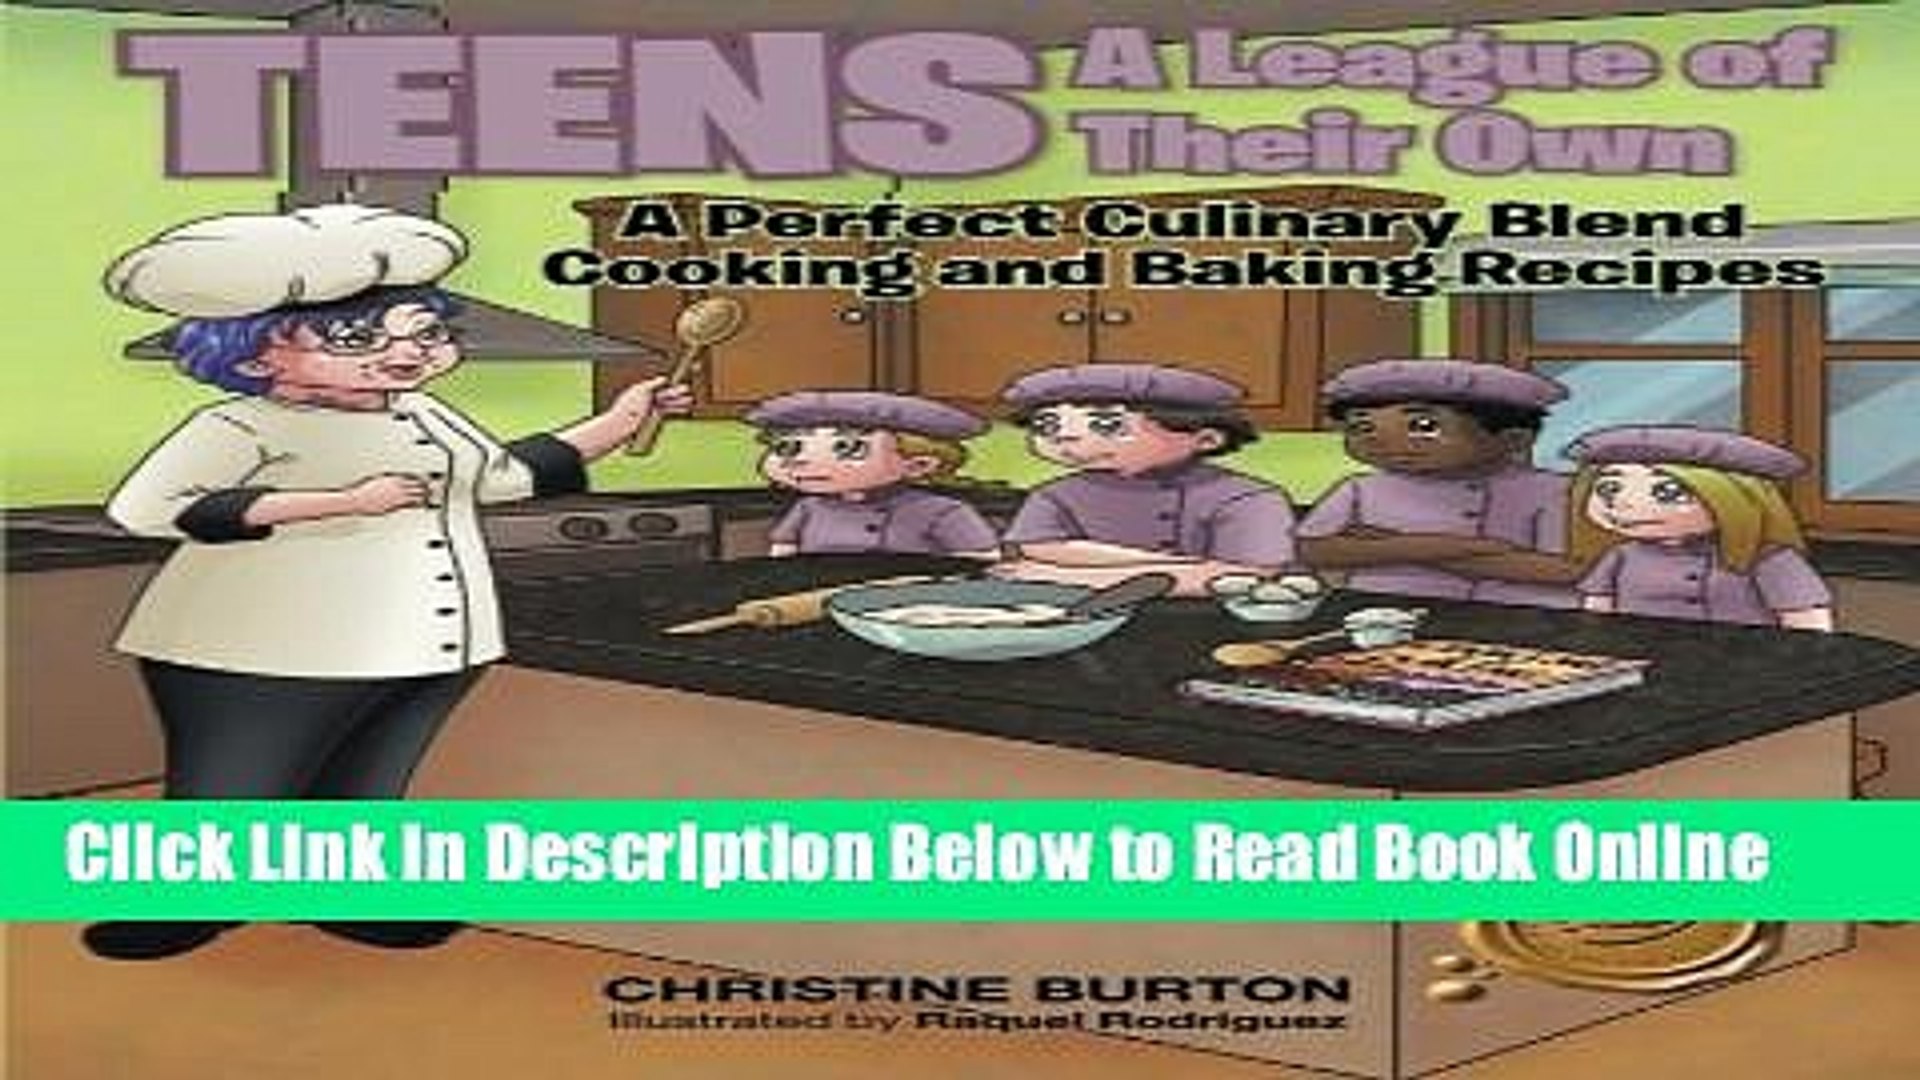 Download Teens: A League of Their Own: A Perfect Culinary Blend: Cooking and Baking Recipes  Ebook